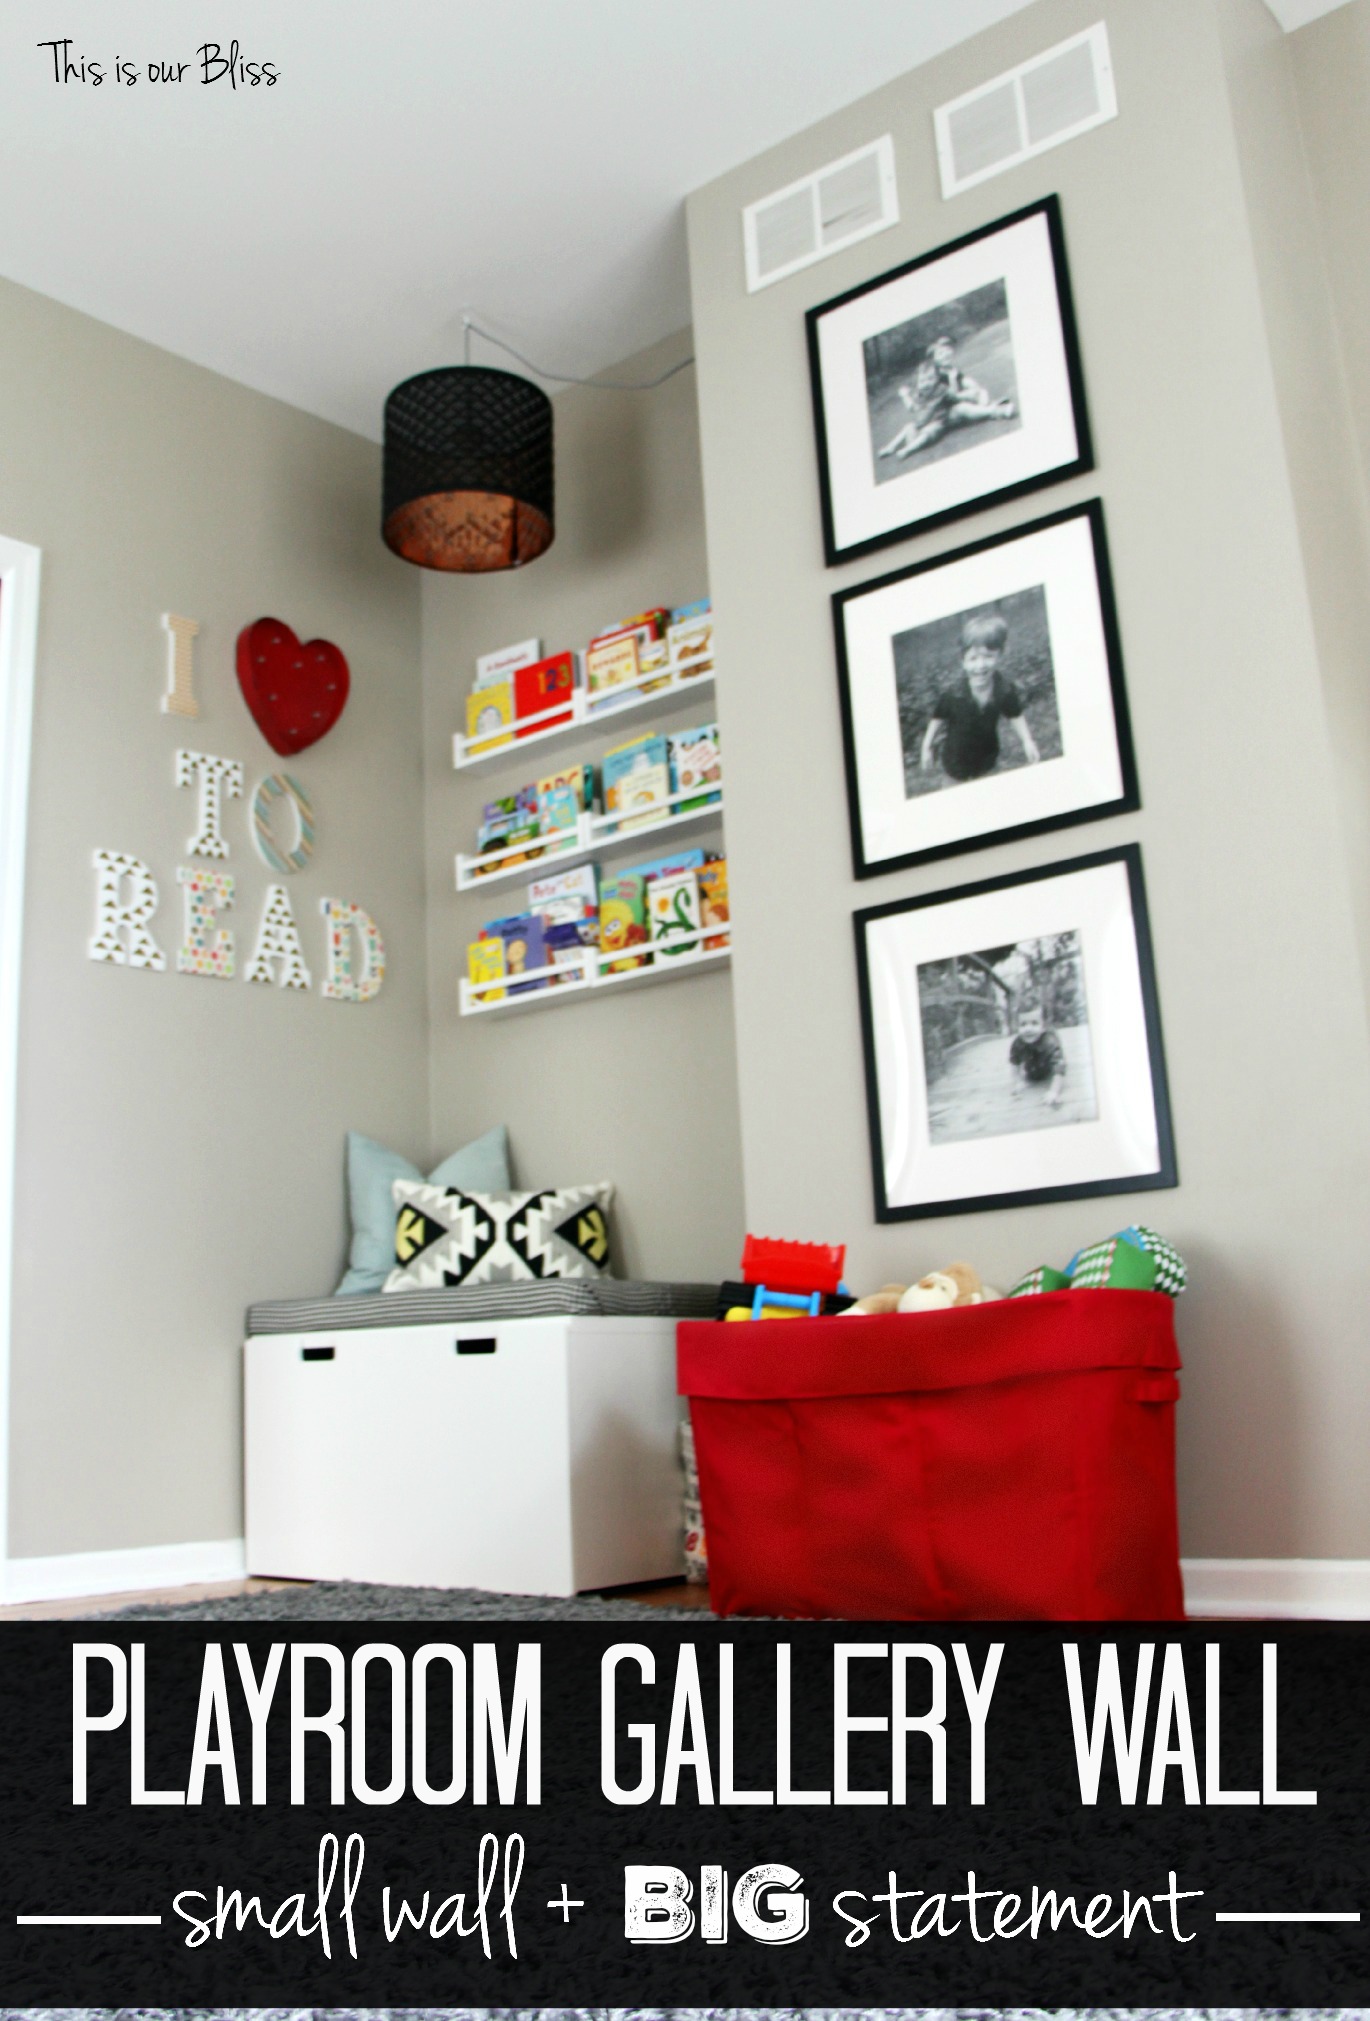 playroom gallery wall Playroom reading nook playroom gallery wall 3 black frames mini playroom picture wall This is our Bliss